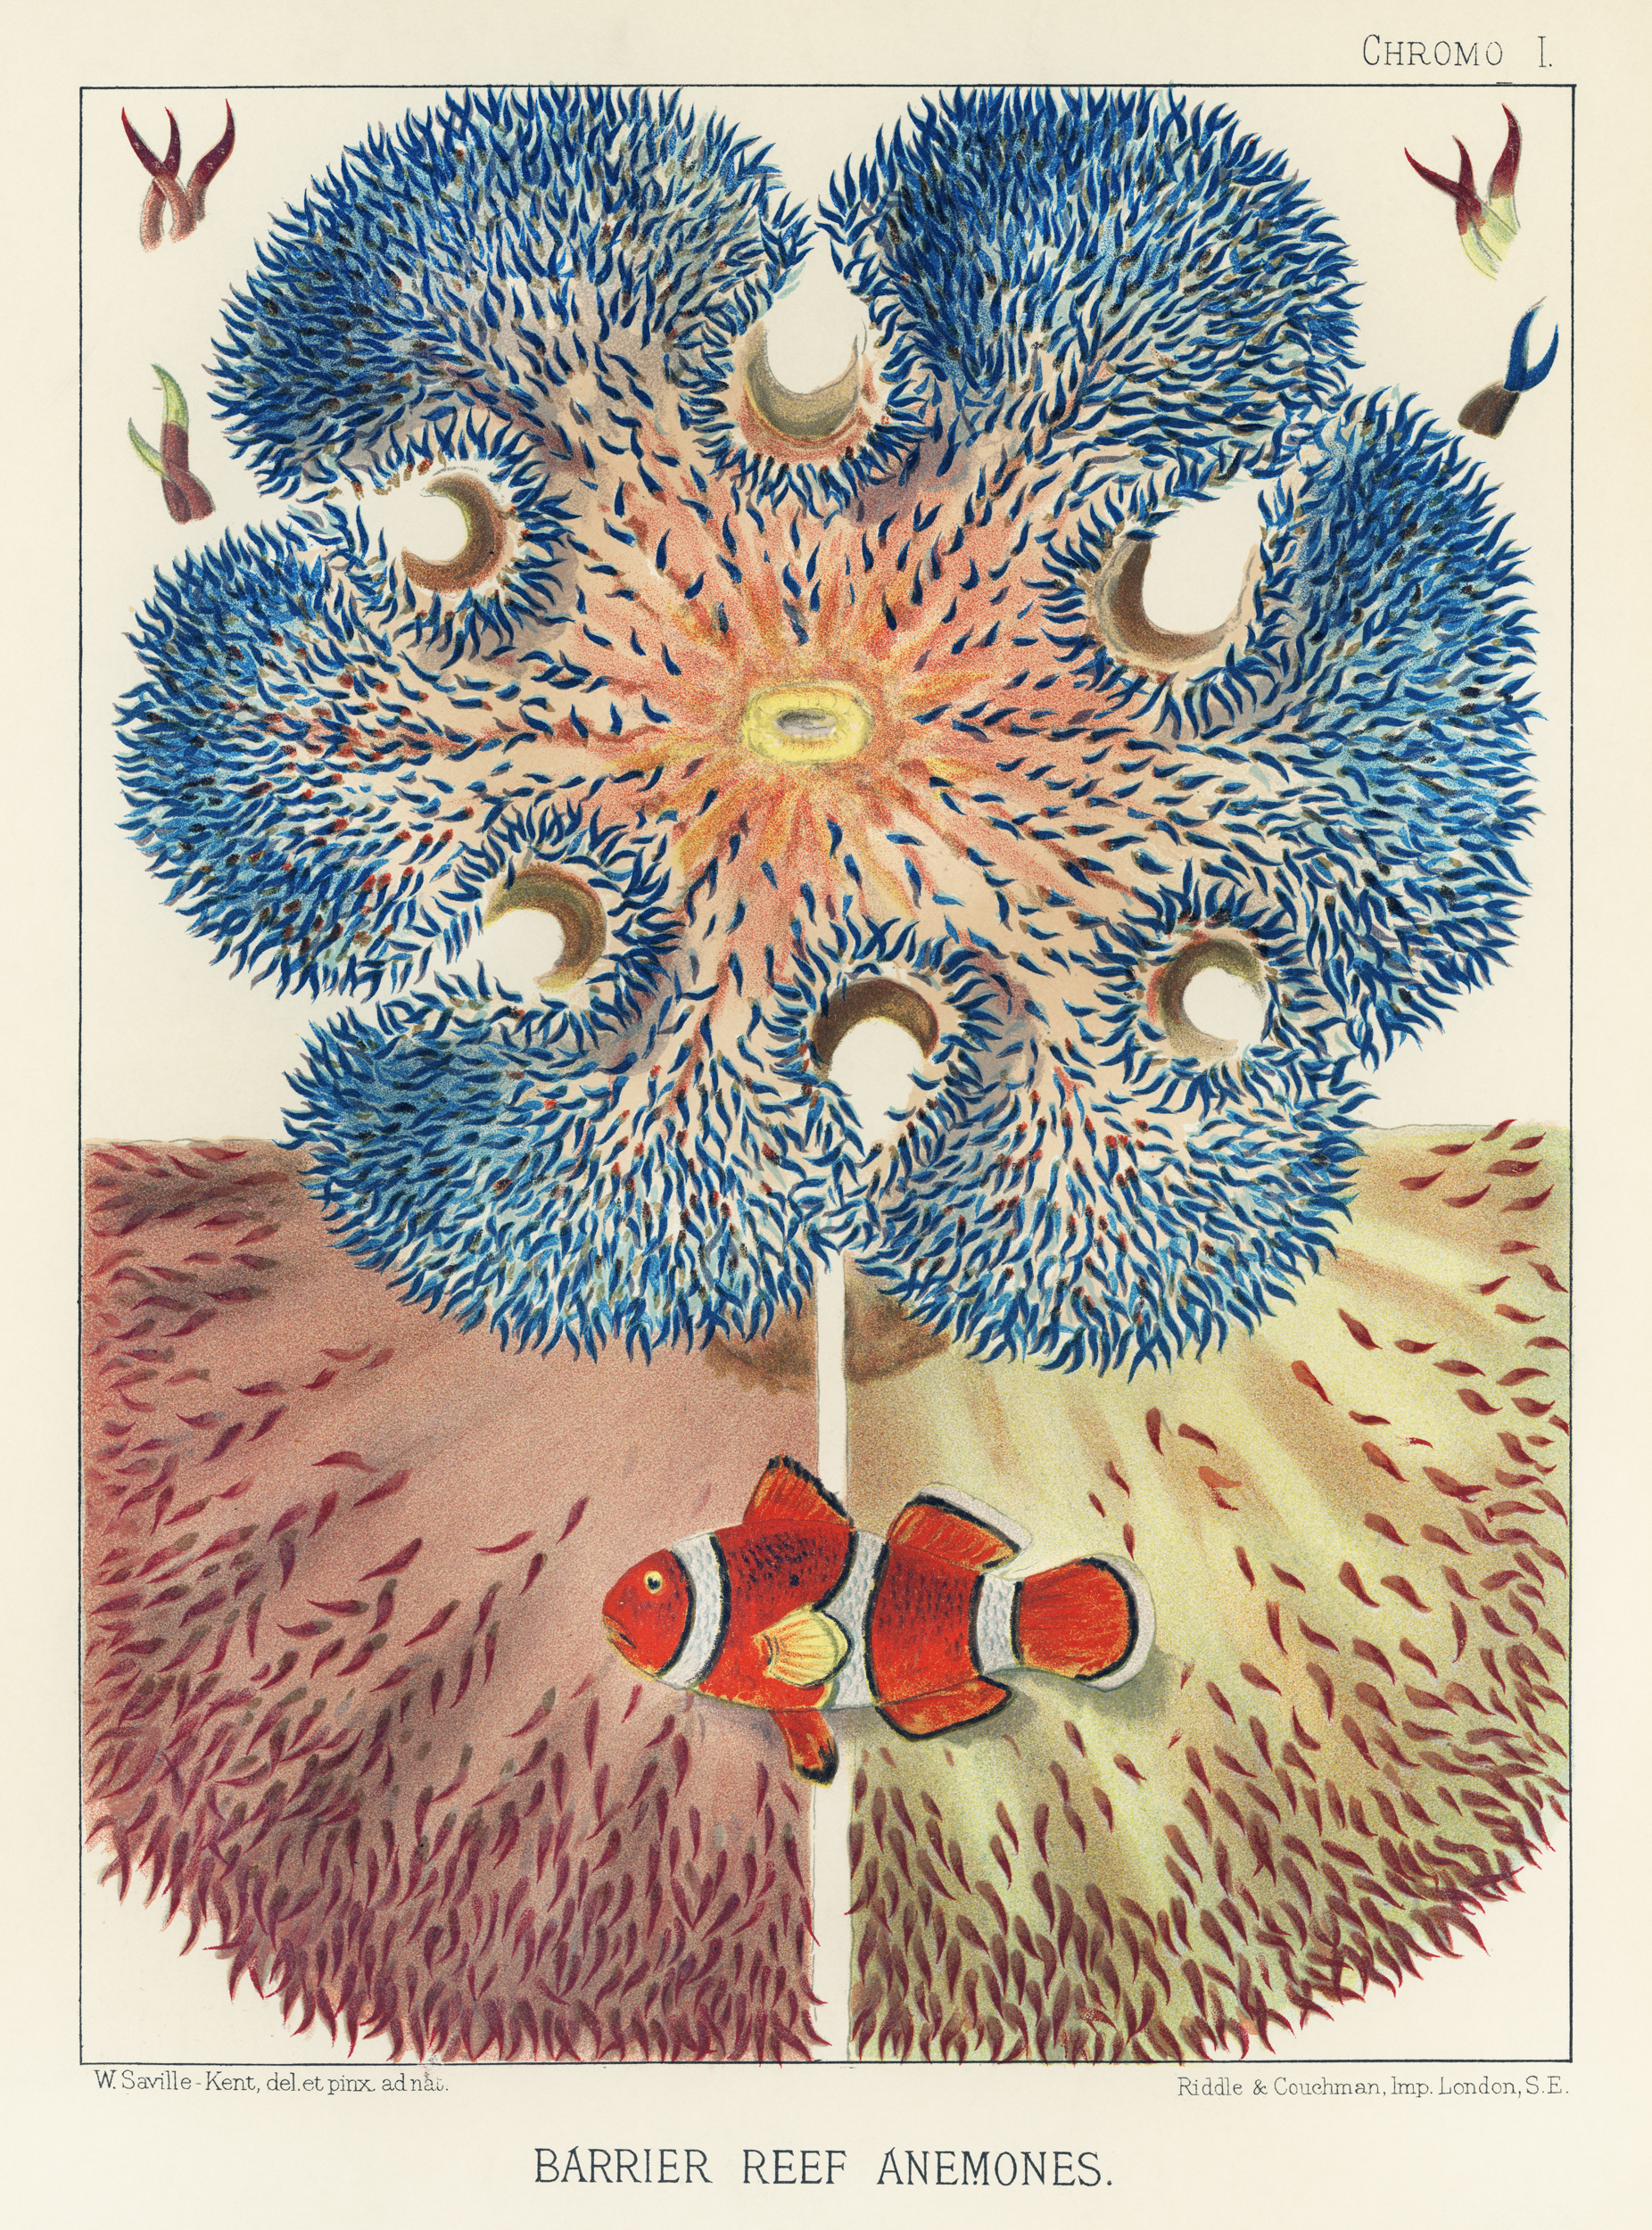 A scientific illustration of barrier reef anemones with a clownfish